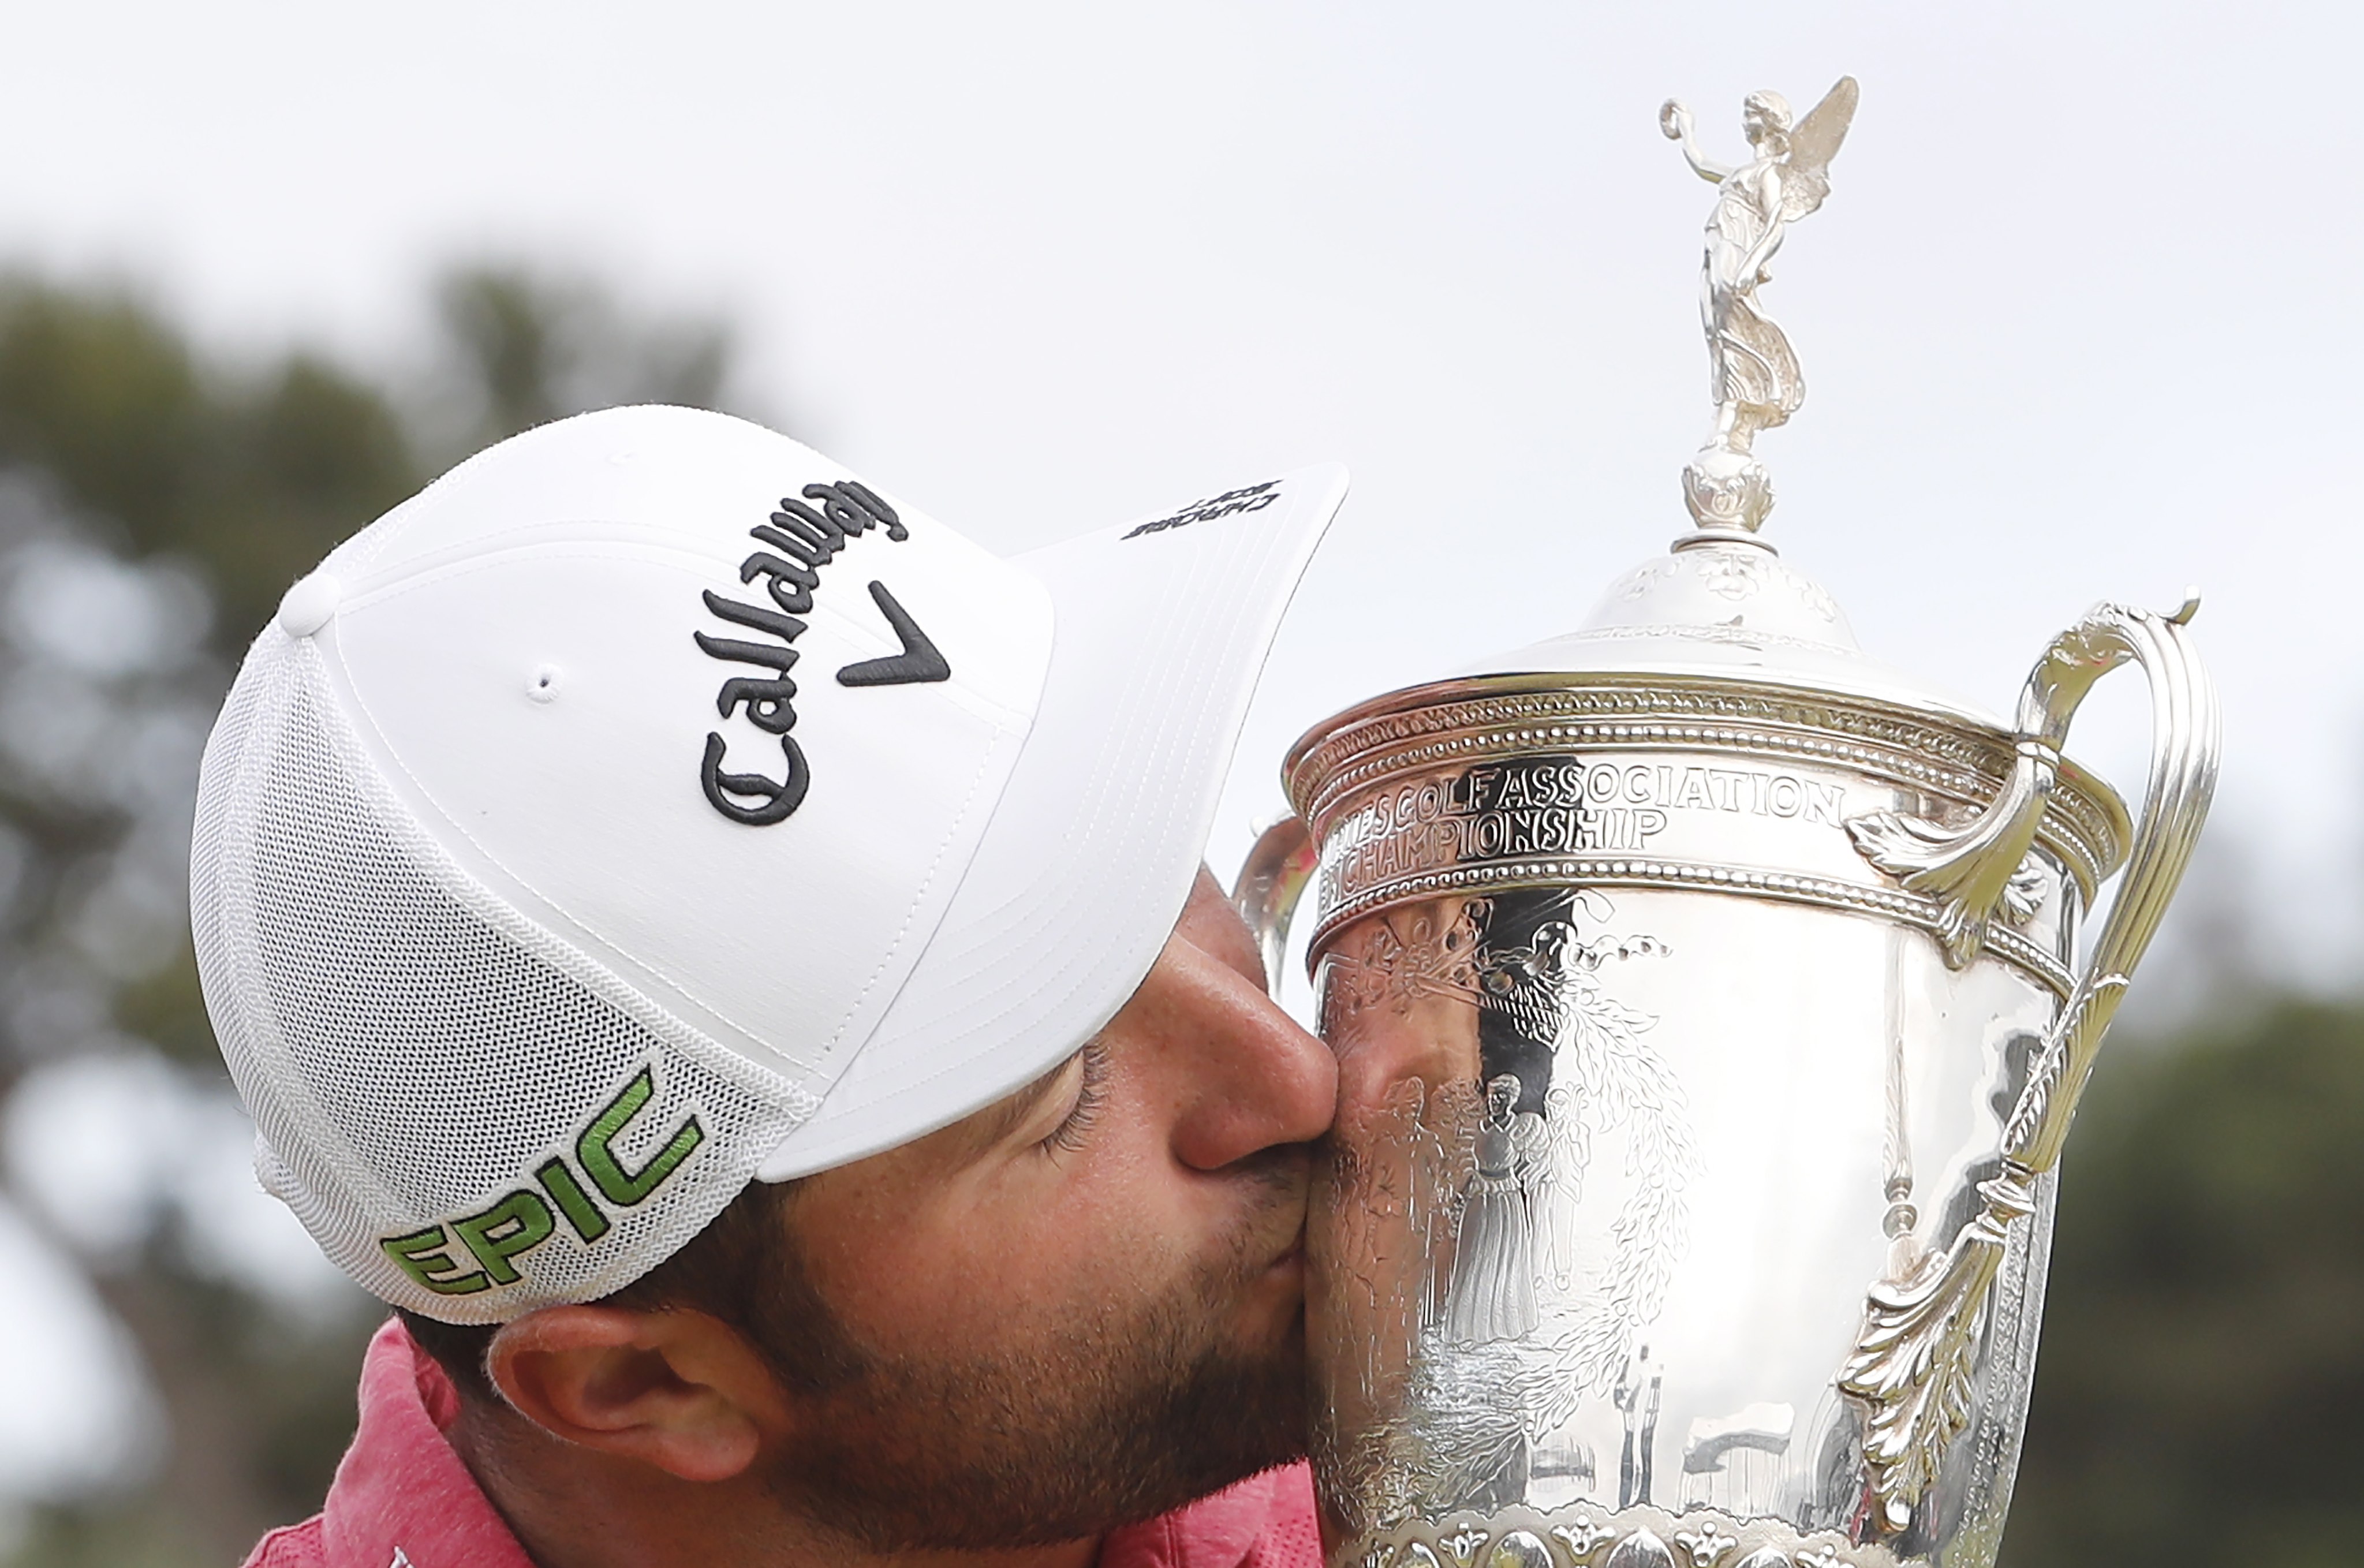 Jon Rahm celebrates his first major win with the US Open Championship Trophy after winning at Torrey Pines. Photo: EPA